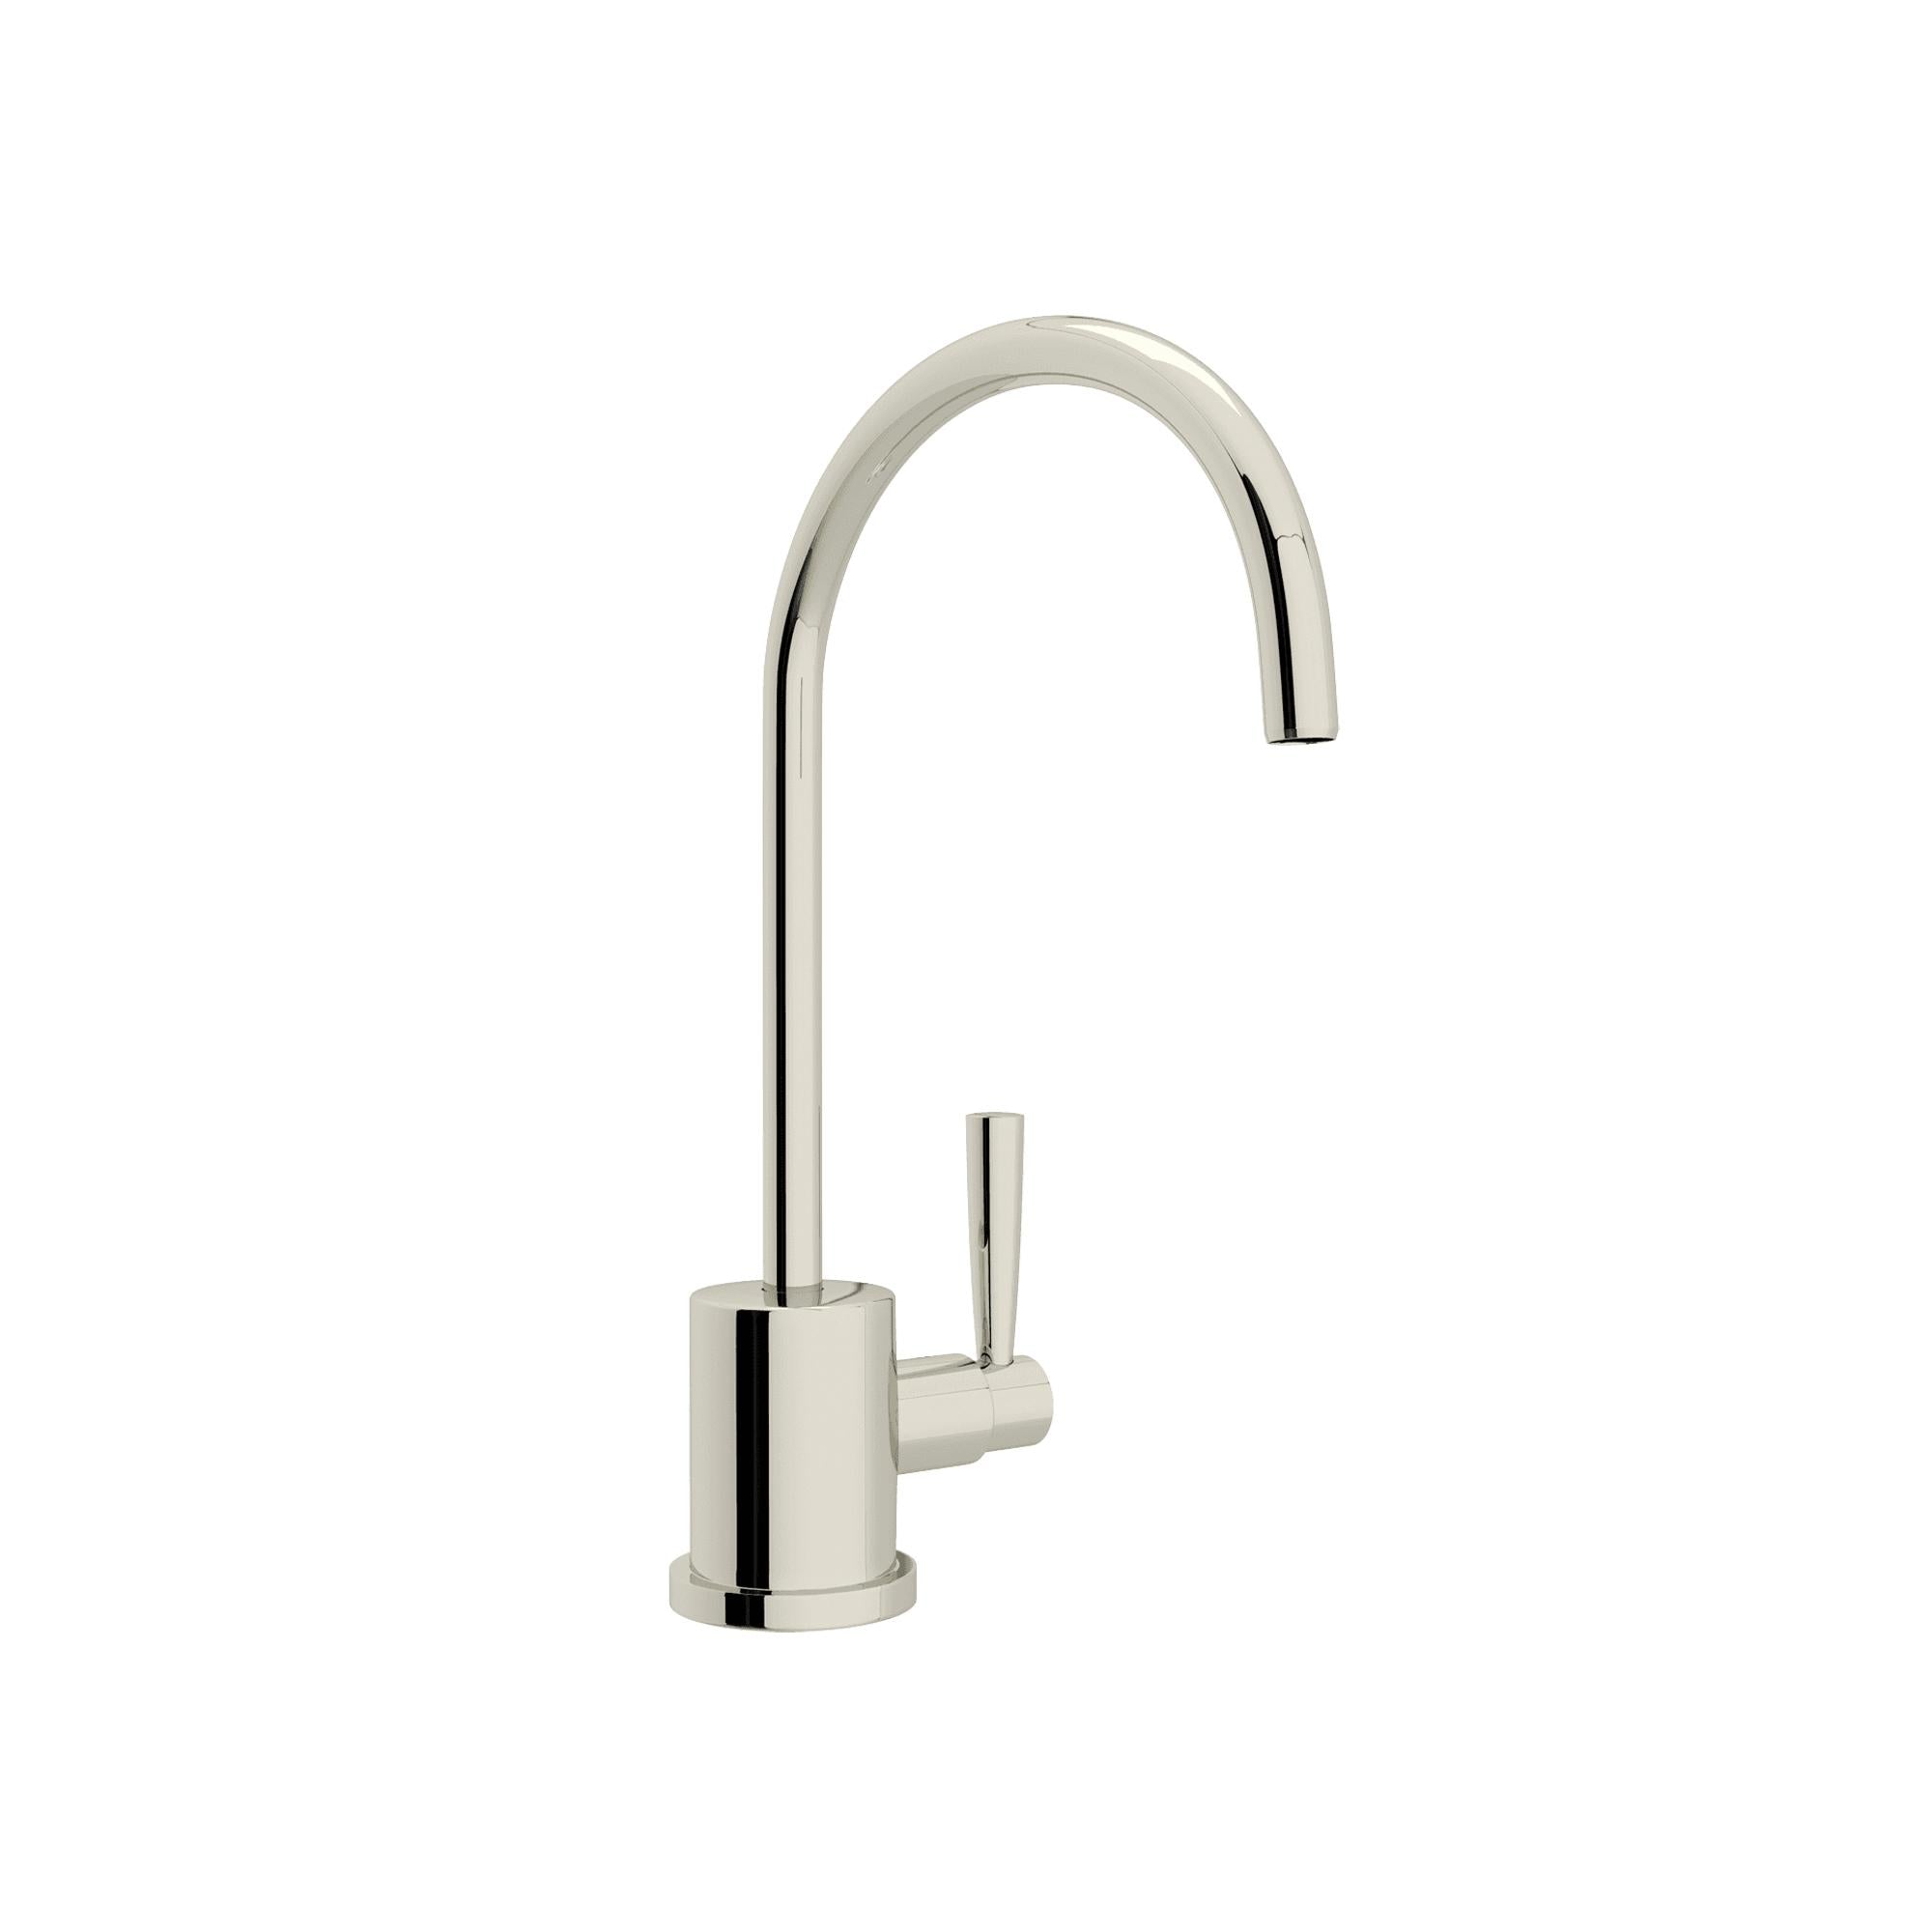 Perrin & Rowe U.1601 Holborn Filter Kitchen Faucet